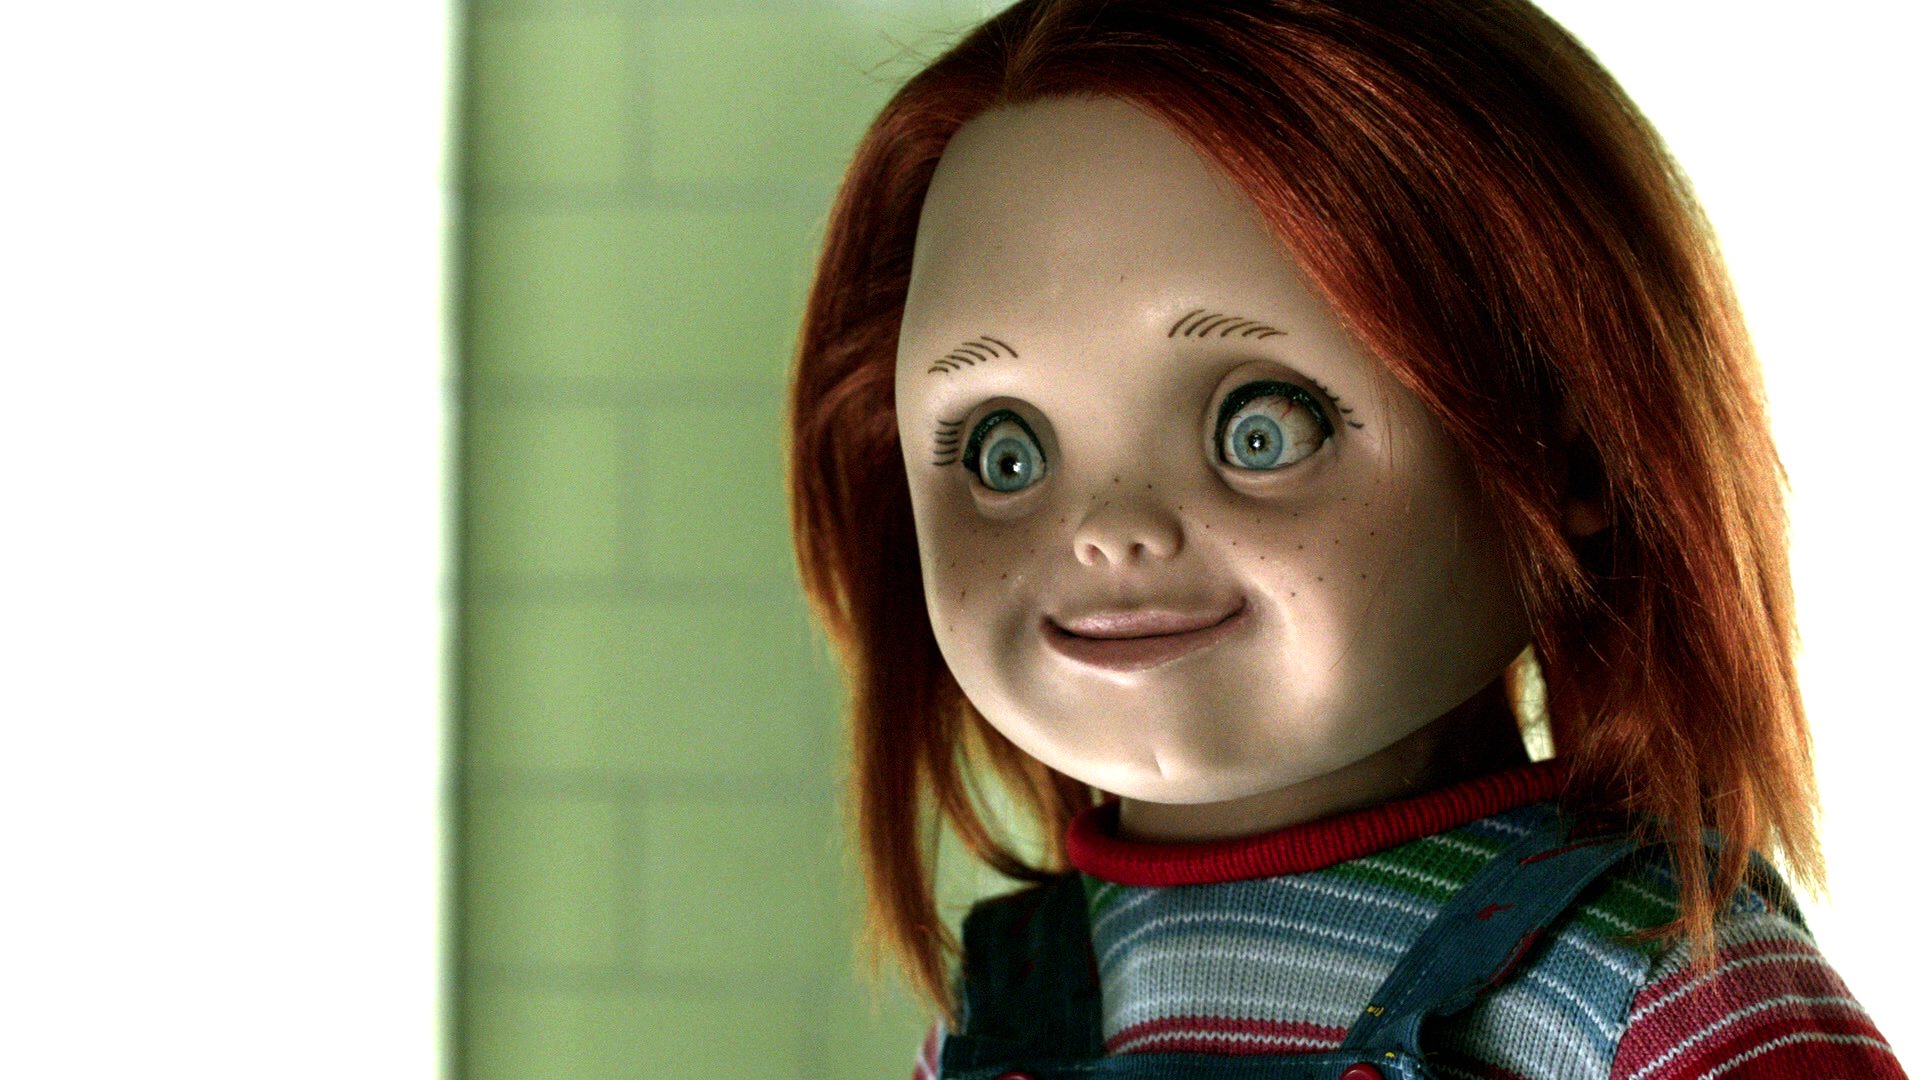 Childs Play Movie 2019 Wallpapers